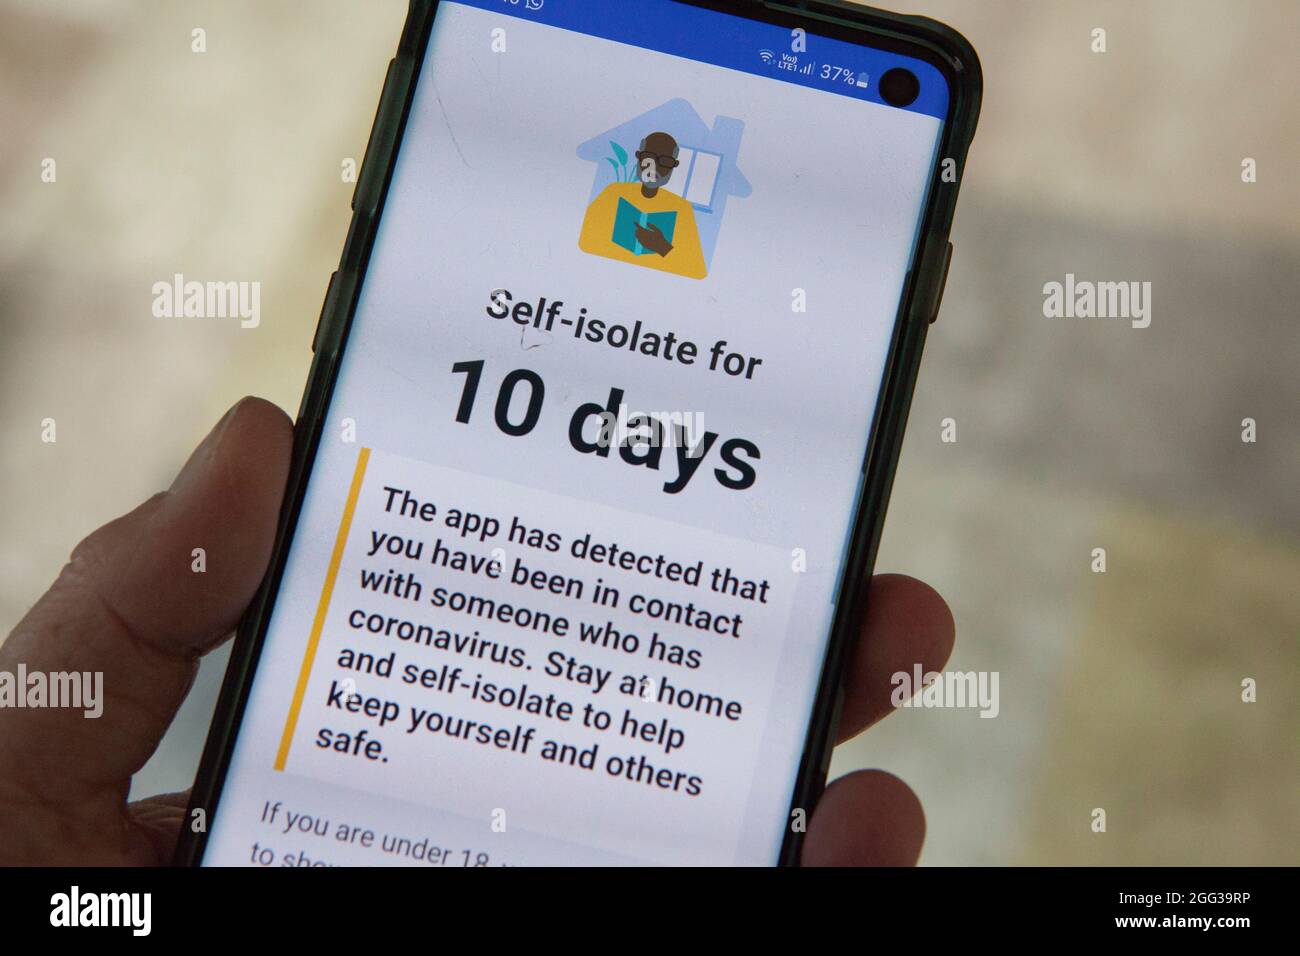 London, UK, 28 August 2021: With over 230,000 people per week testing positive for coronavirus in the UK, and on average over 100 people per day dying, this NHS Covid app notification to self-isolate for 10 days is a common sight. People who have received two vaccine doses are no longer required to self-isolate. Anna Watson/Alamy Live News Stock Photo